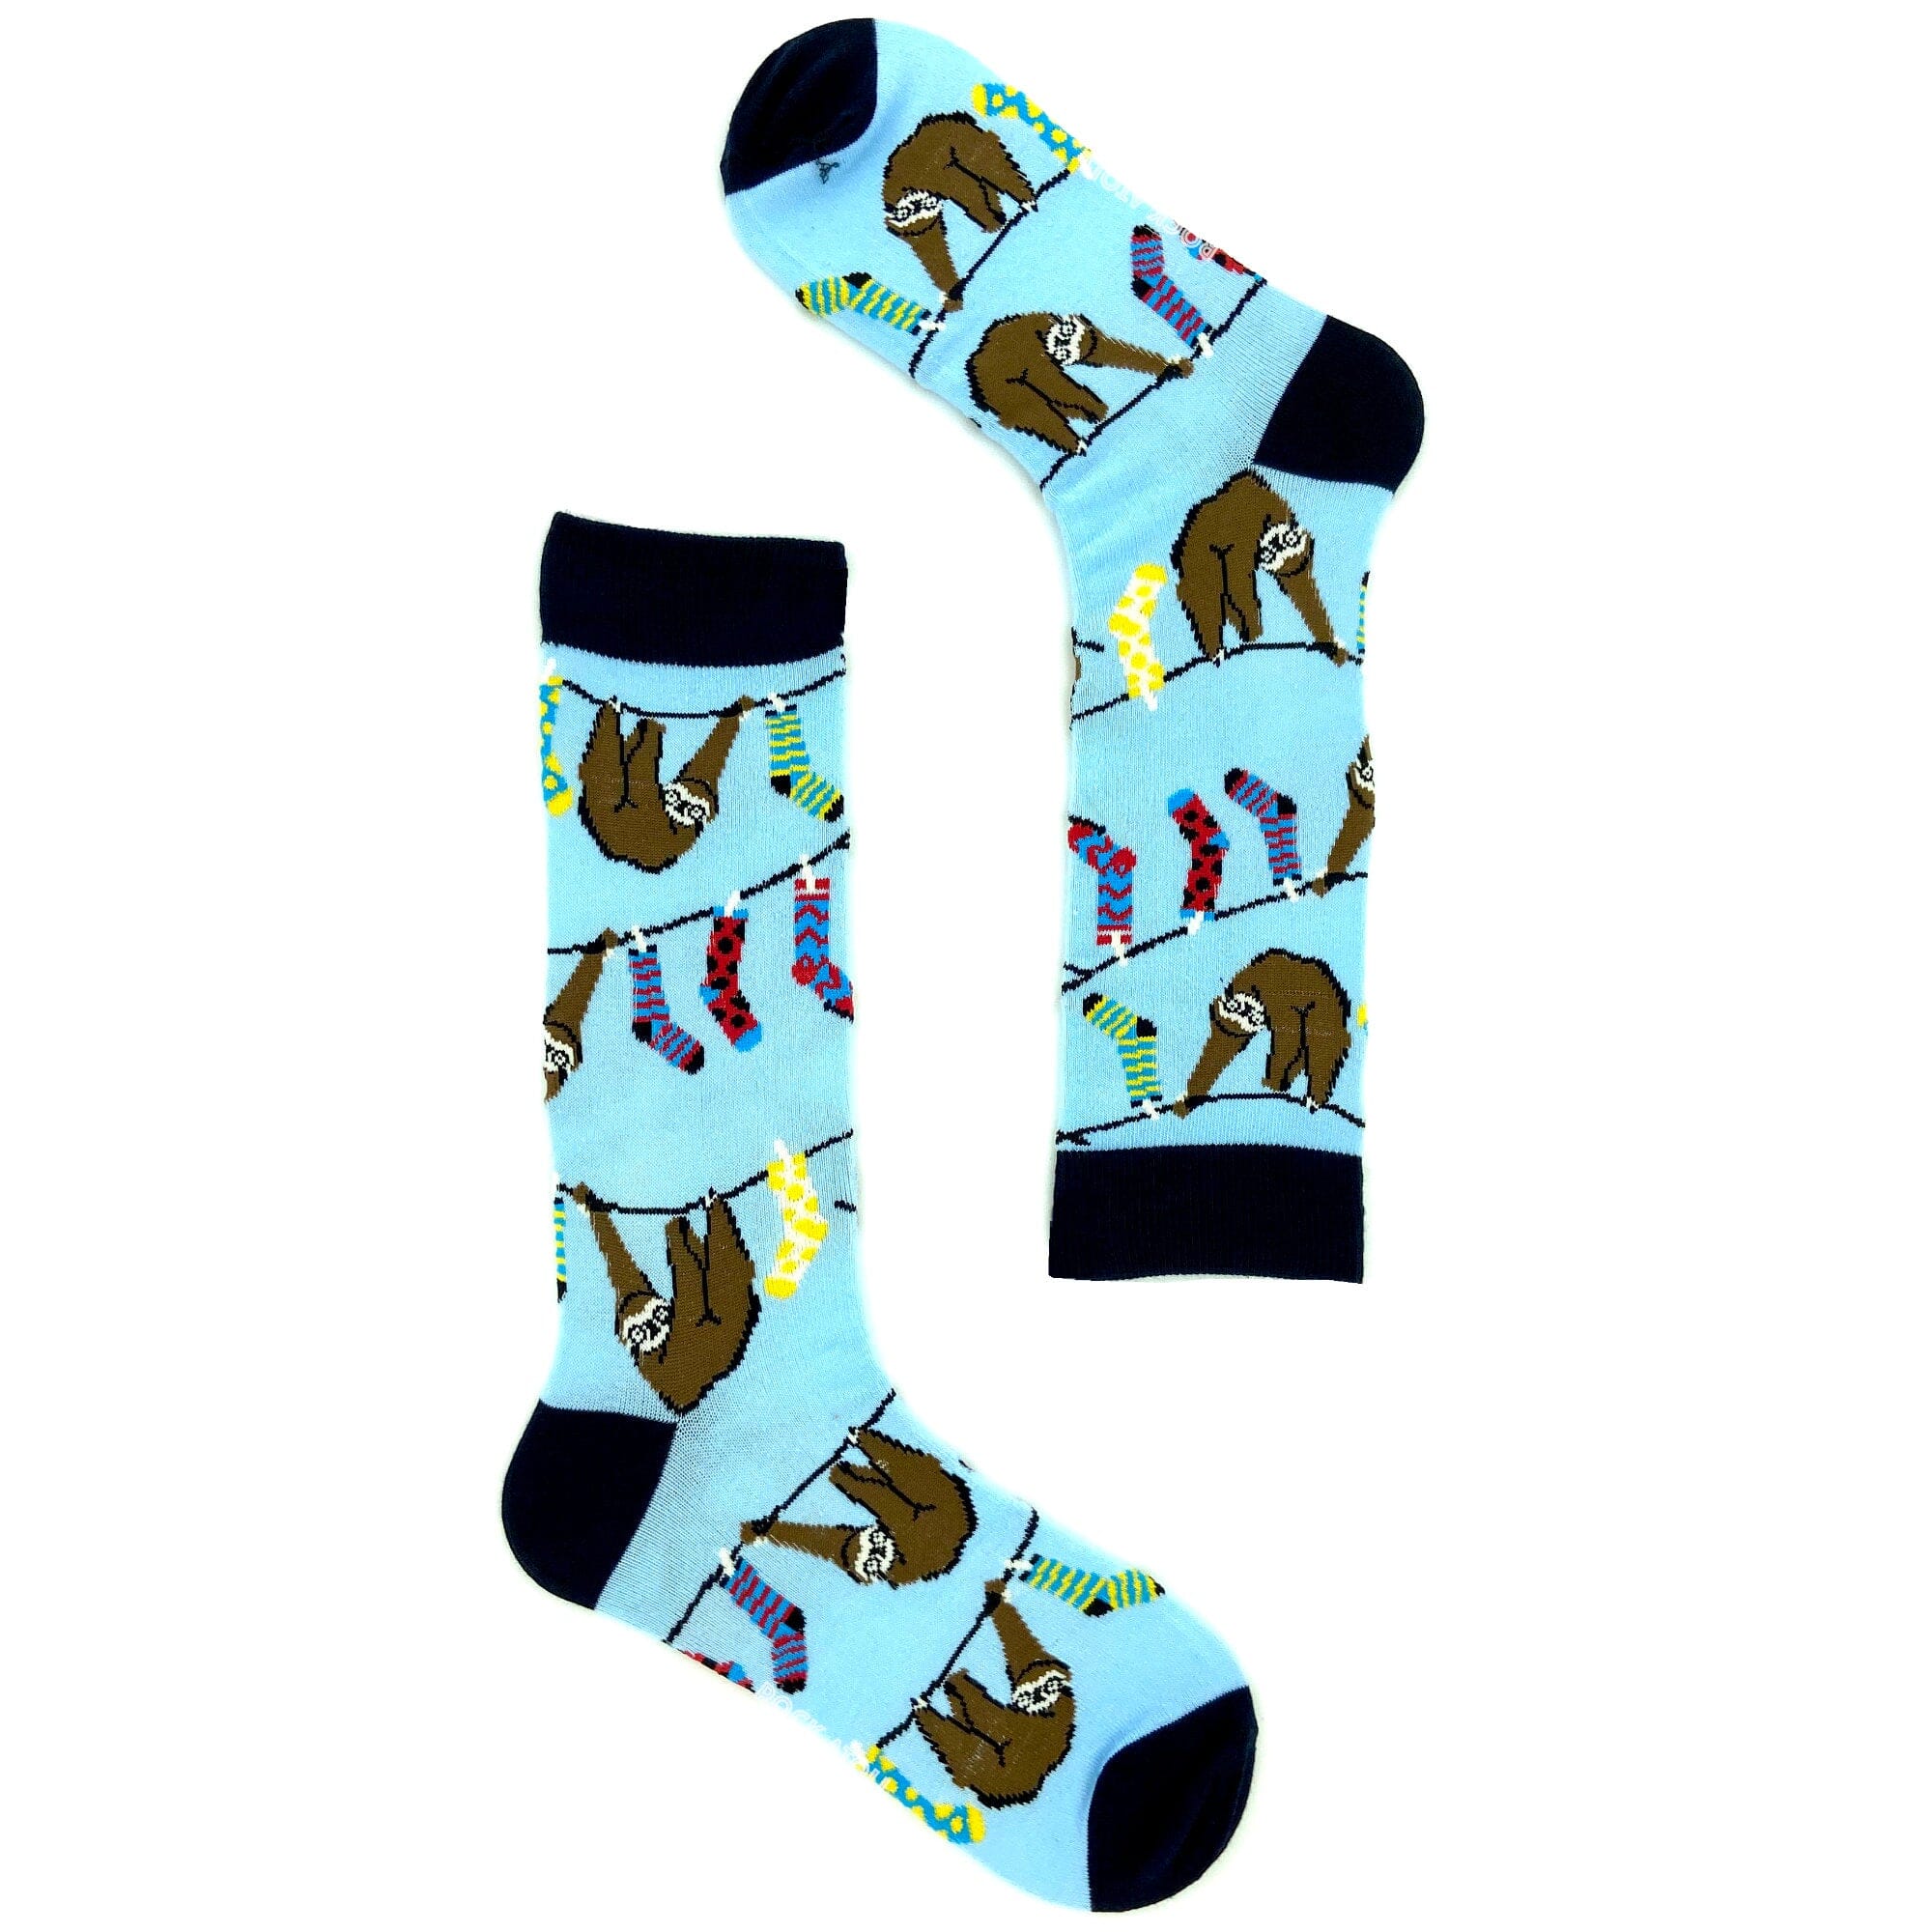 Cute Fun Sloths Dangling on Clothes Lines Patterned Novelty Crew Socks